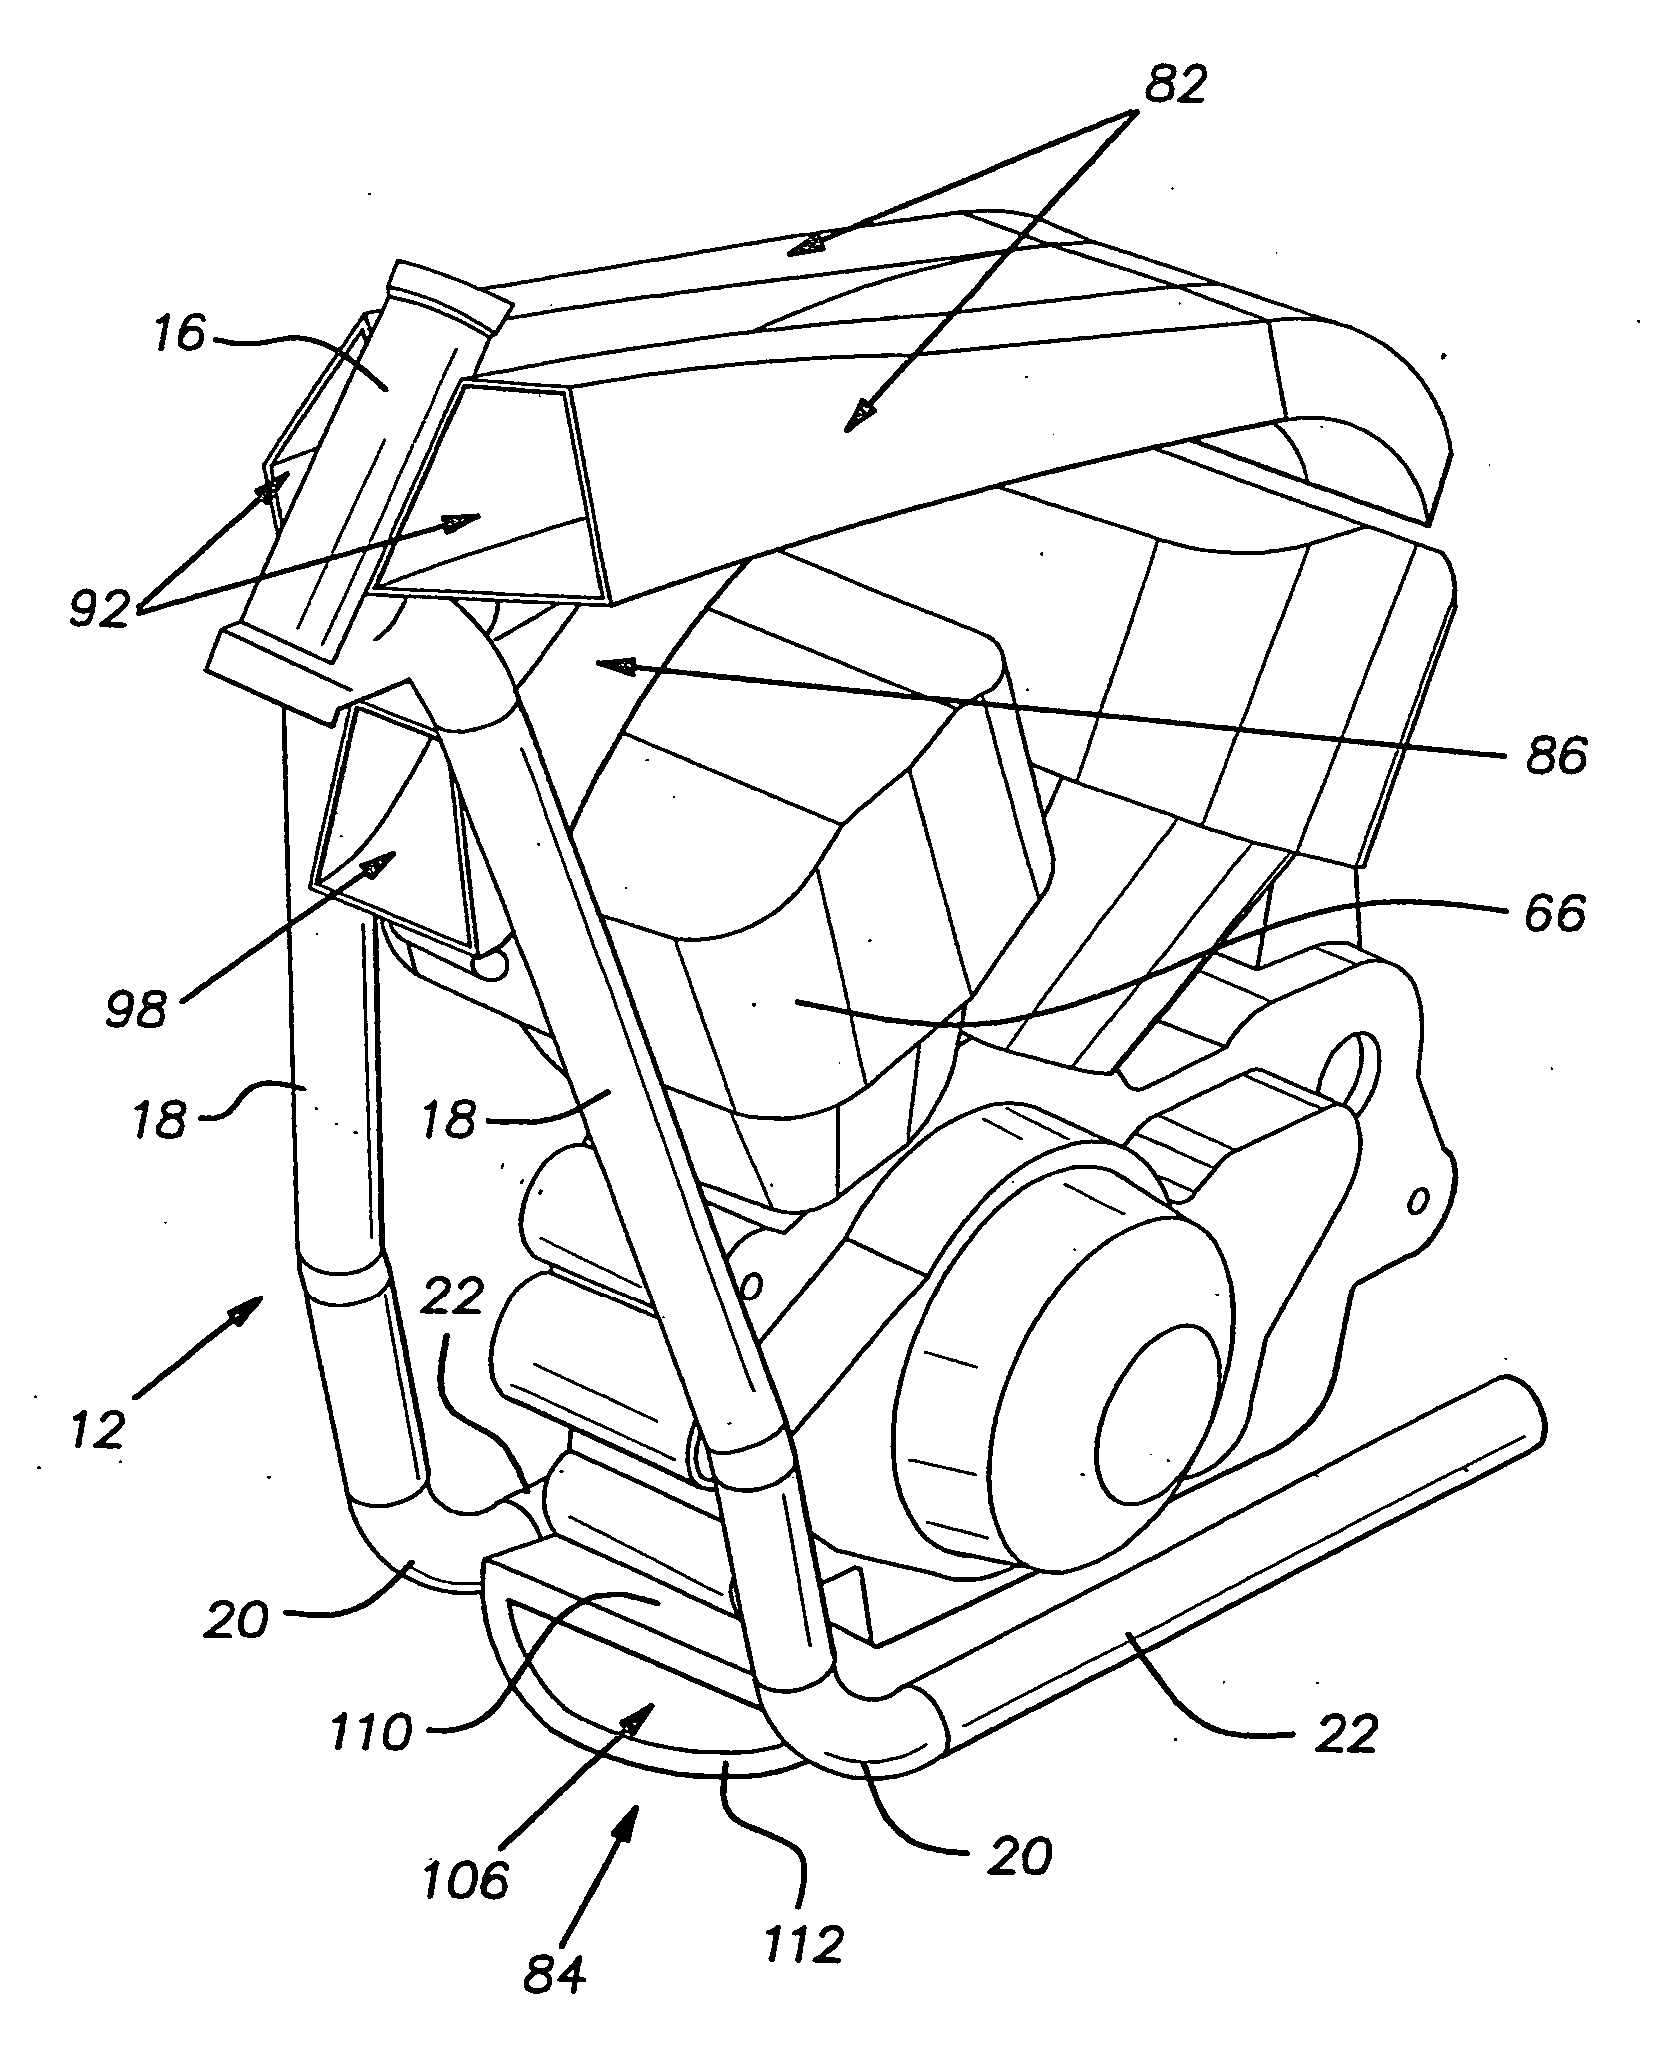 Motorcycle with a rear-mounted radiator